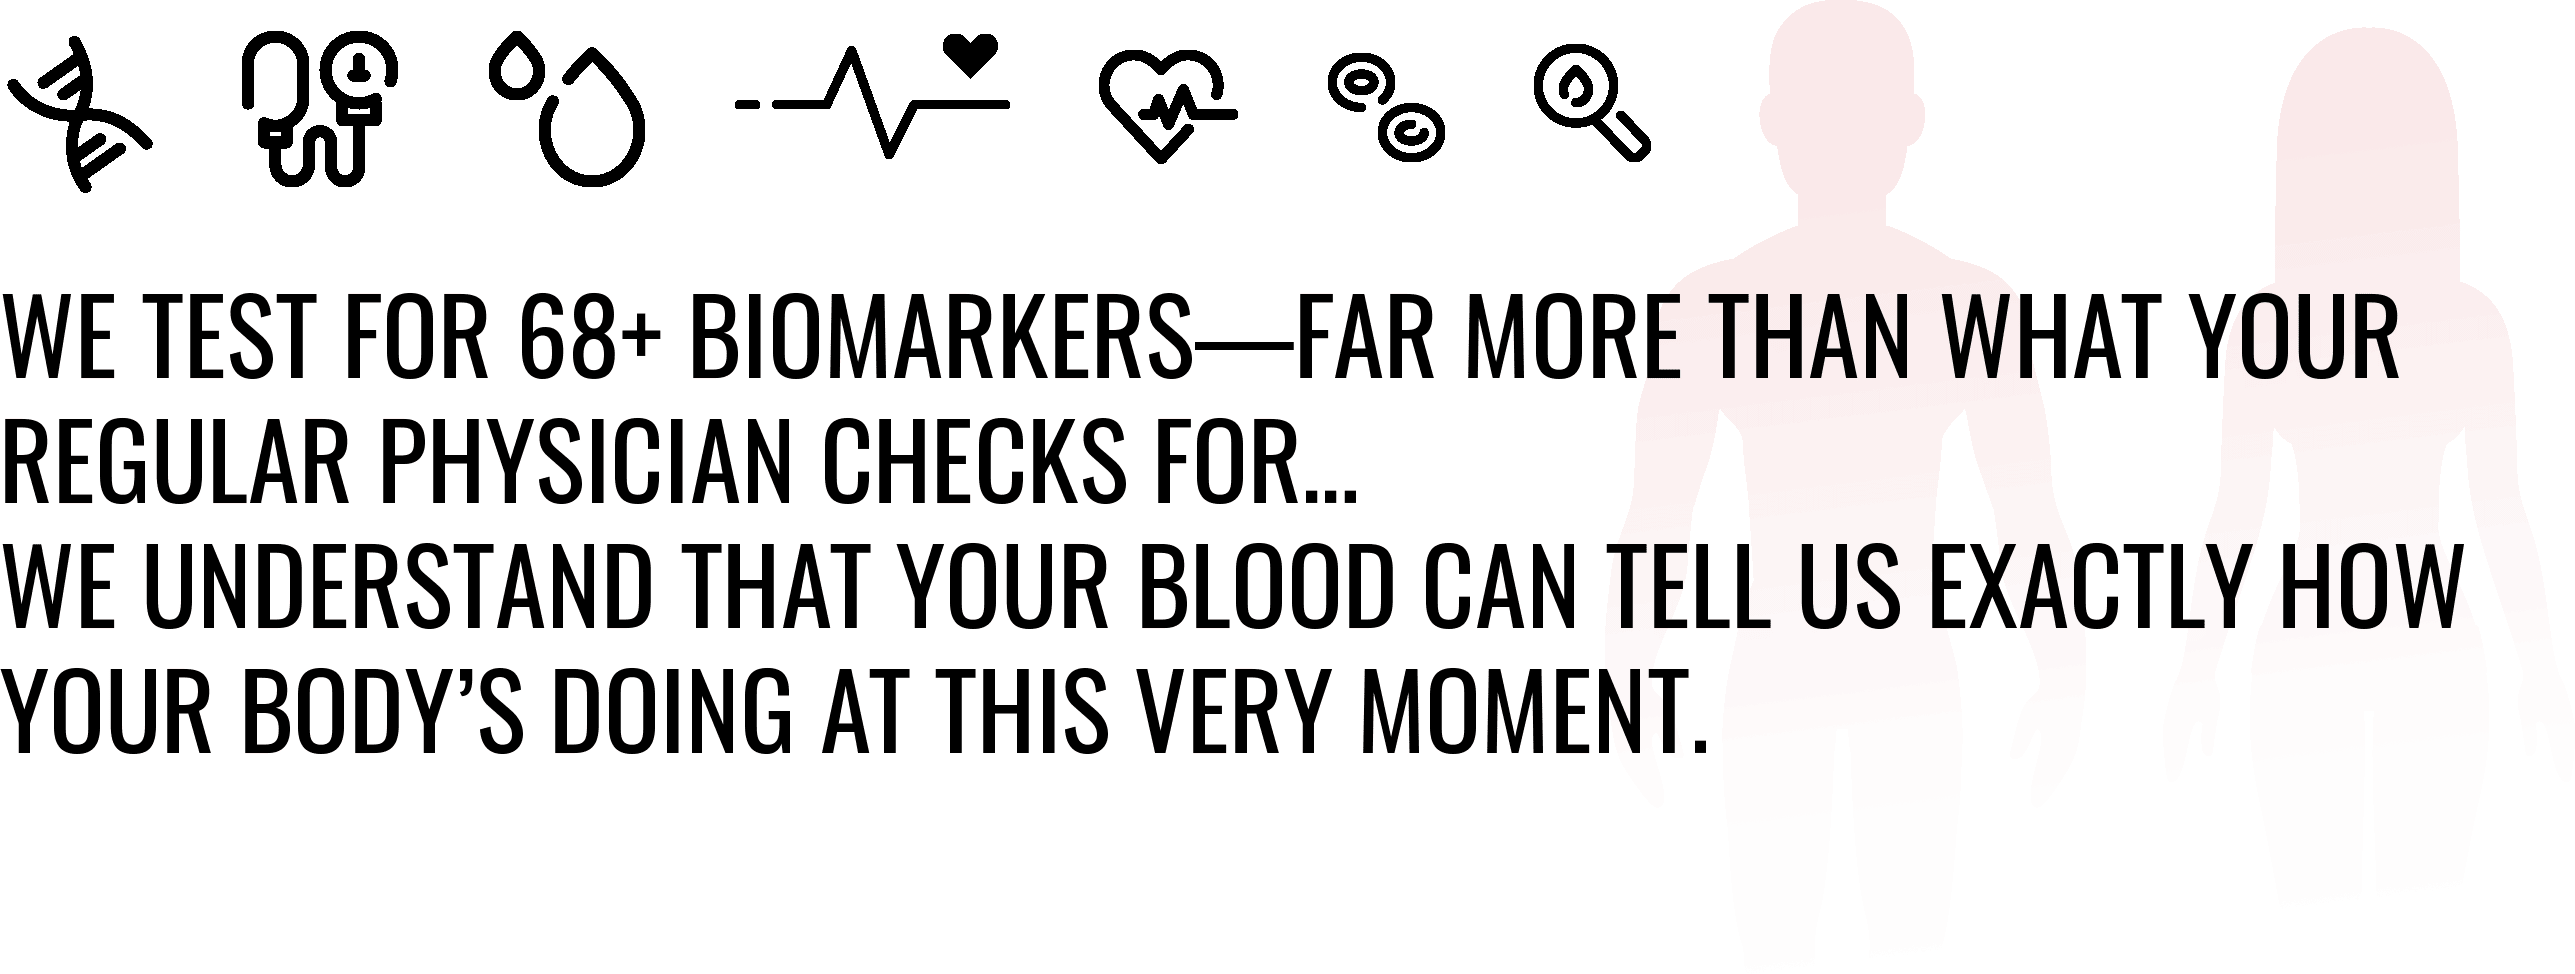 We test for 68+ biomarkers — far more than what your regular physician checks for... We understand that your blood can tell us exactly how your body's doing at this very moment.